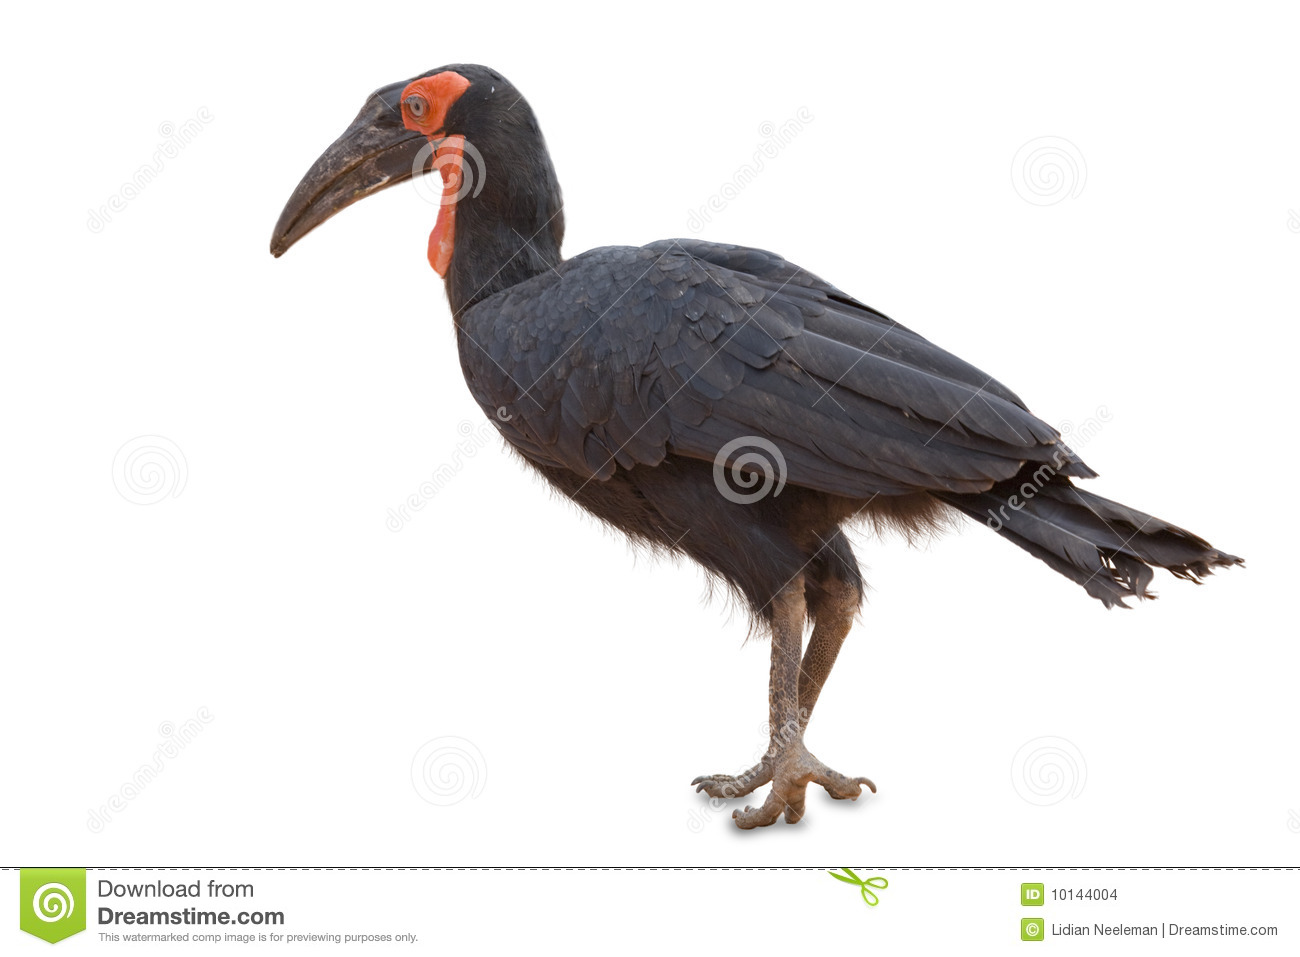 Southern Ground Hornbill clipart #16, Download drawings